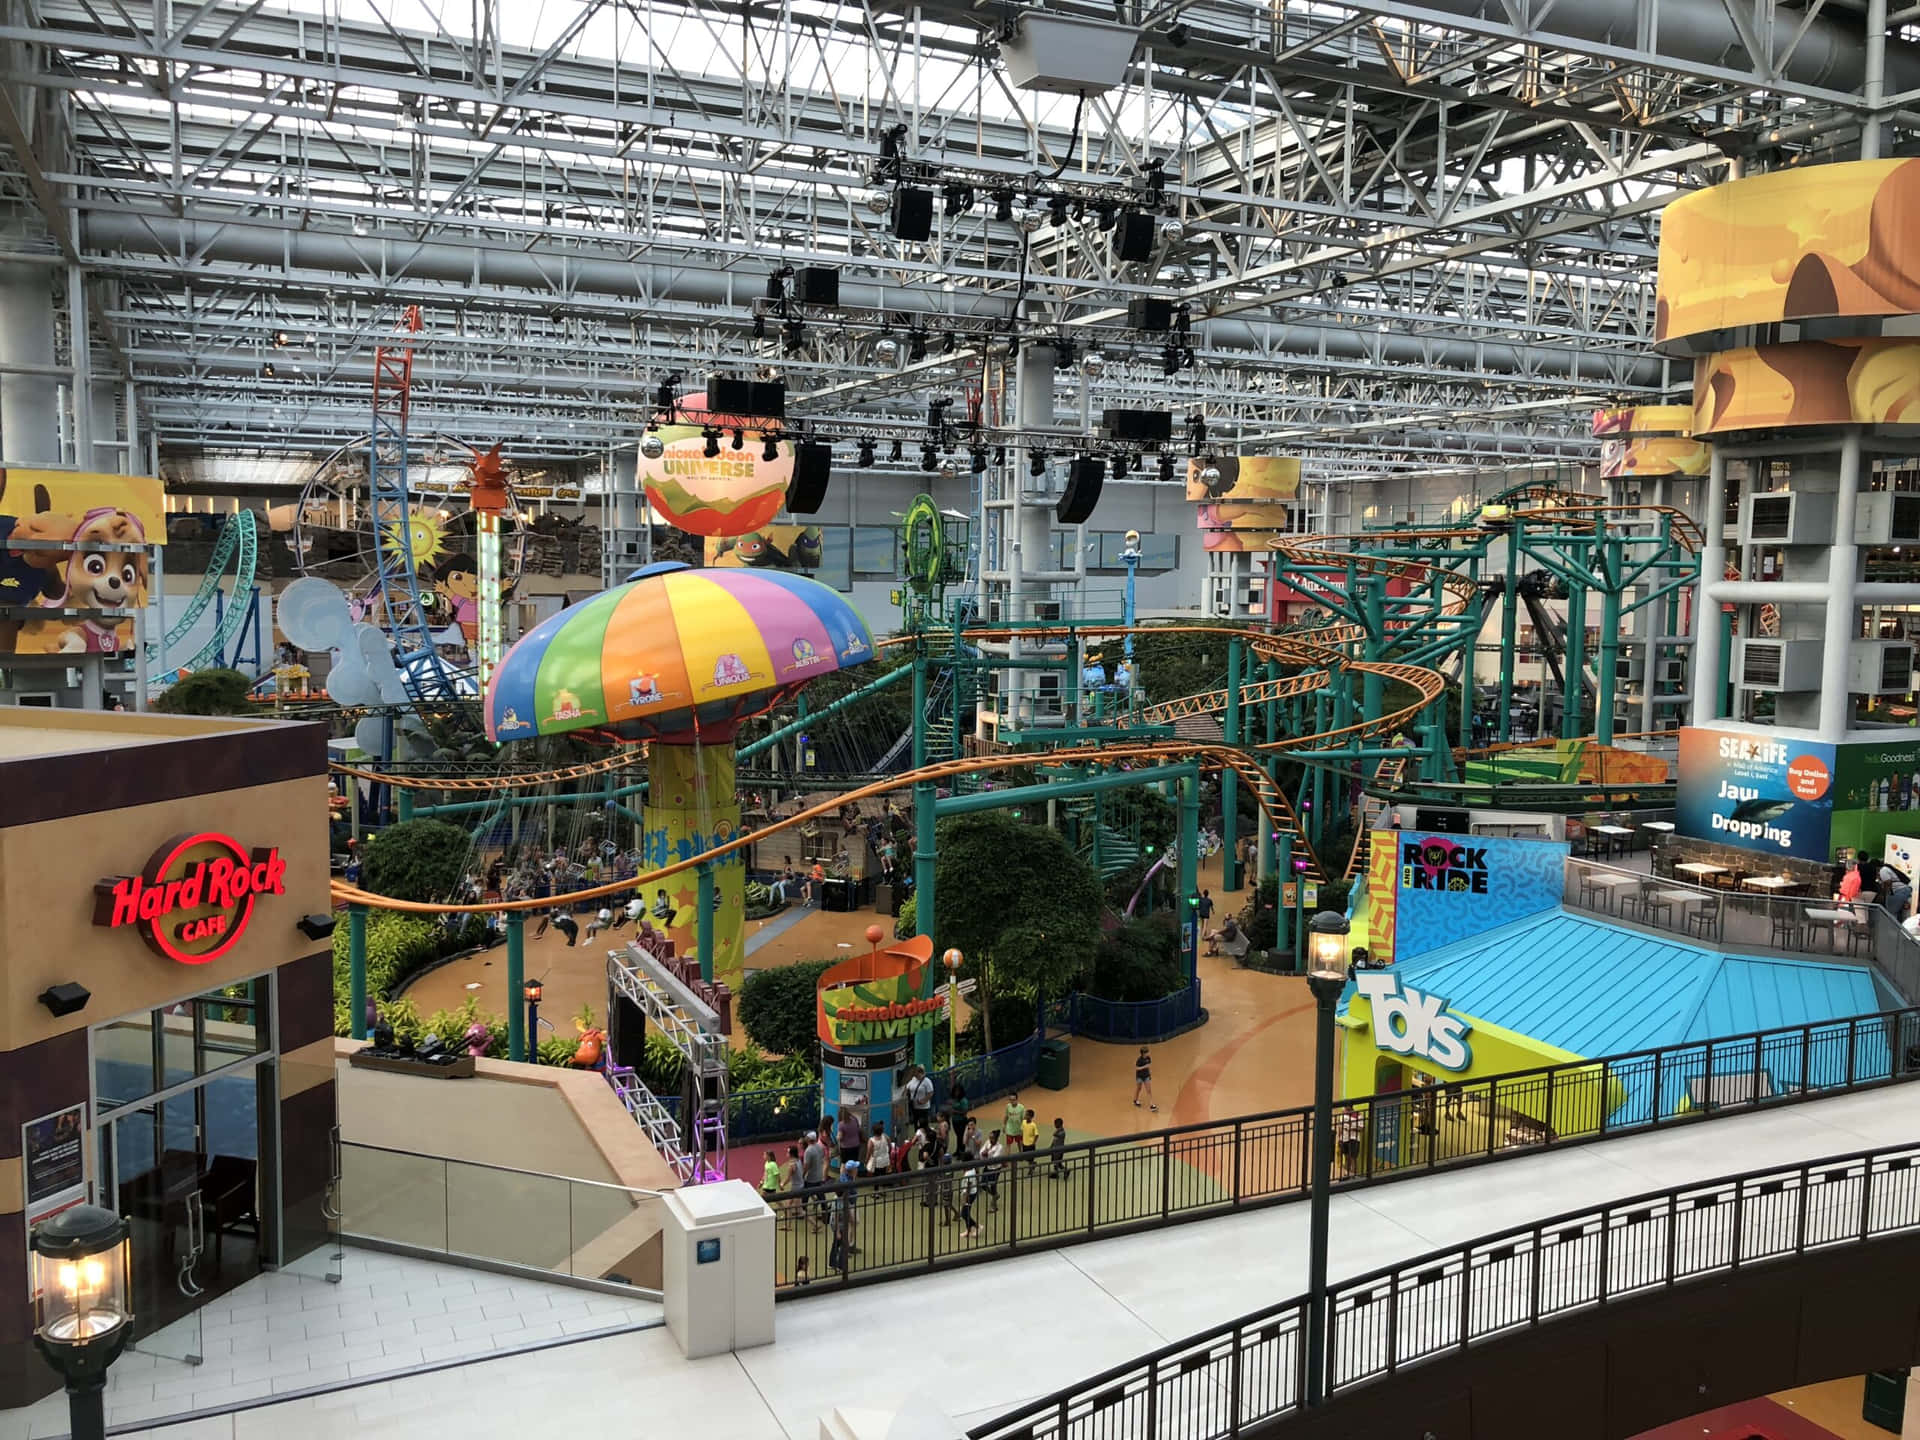 A Mall With A Roller Coaster And Other Rides